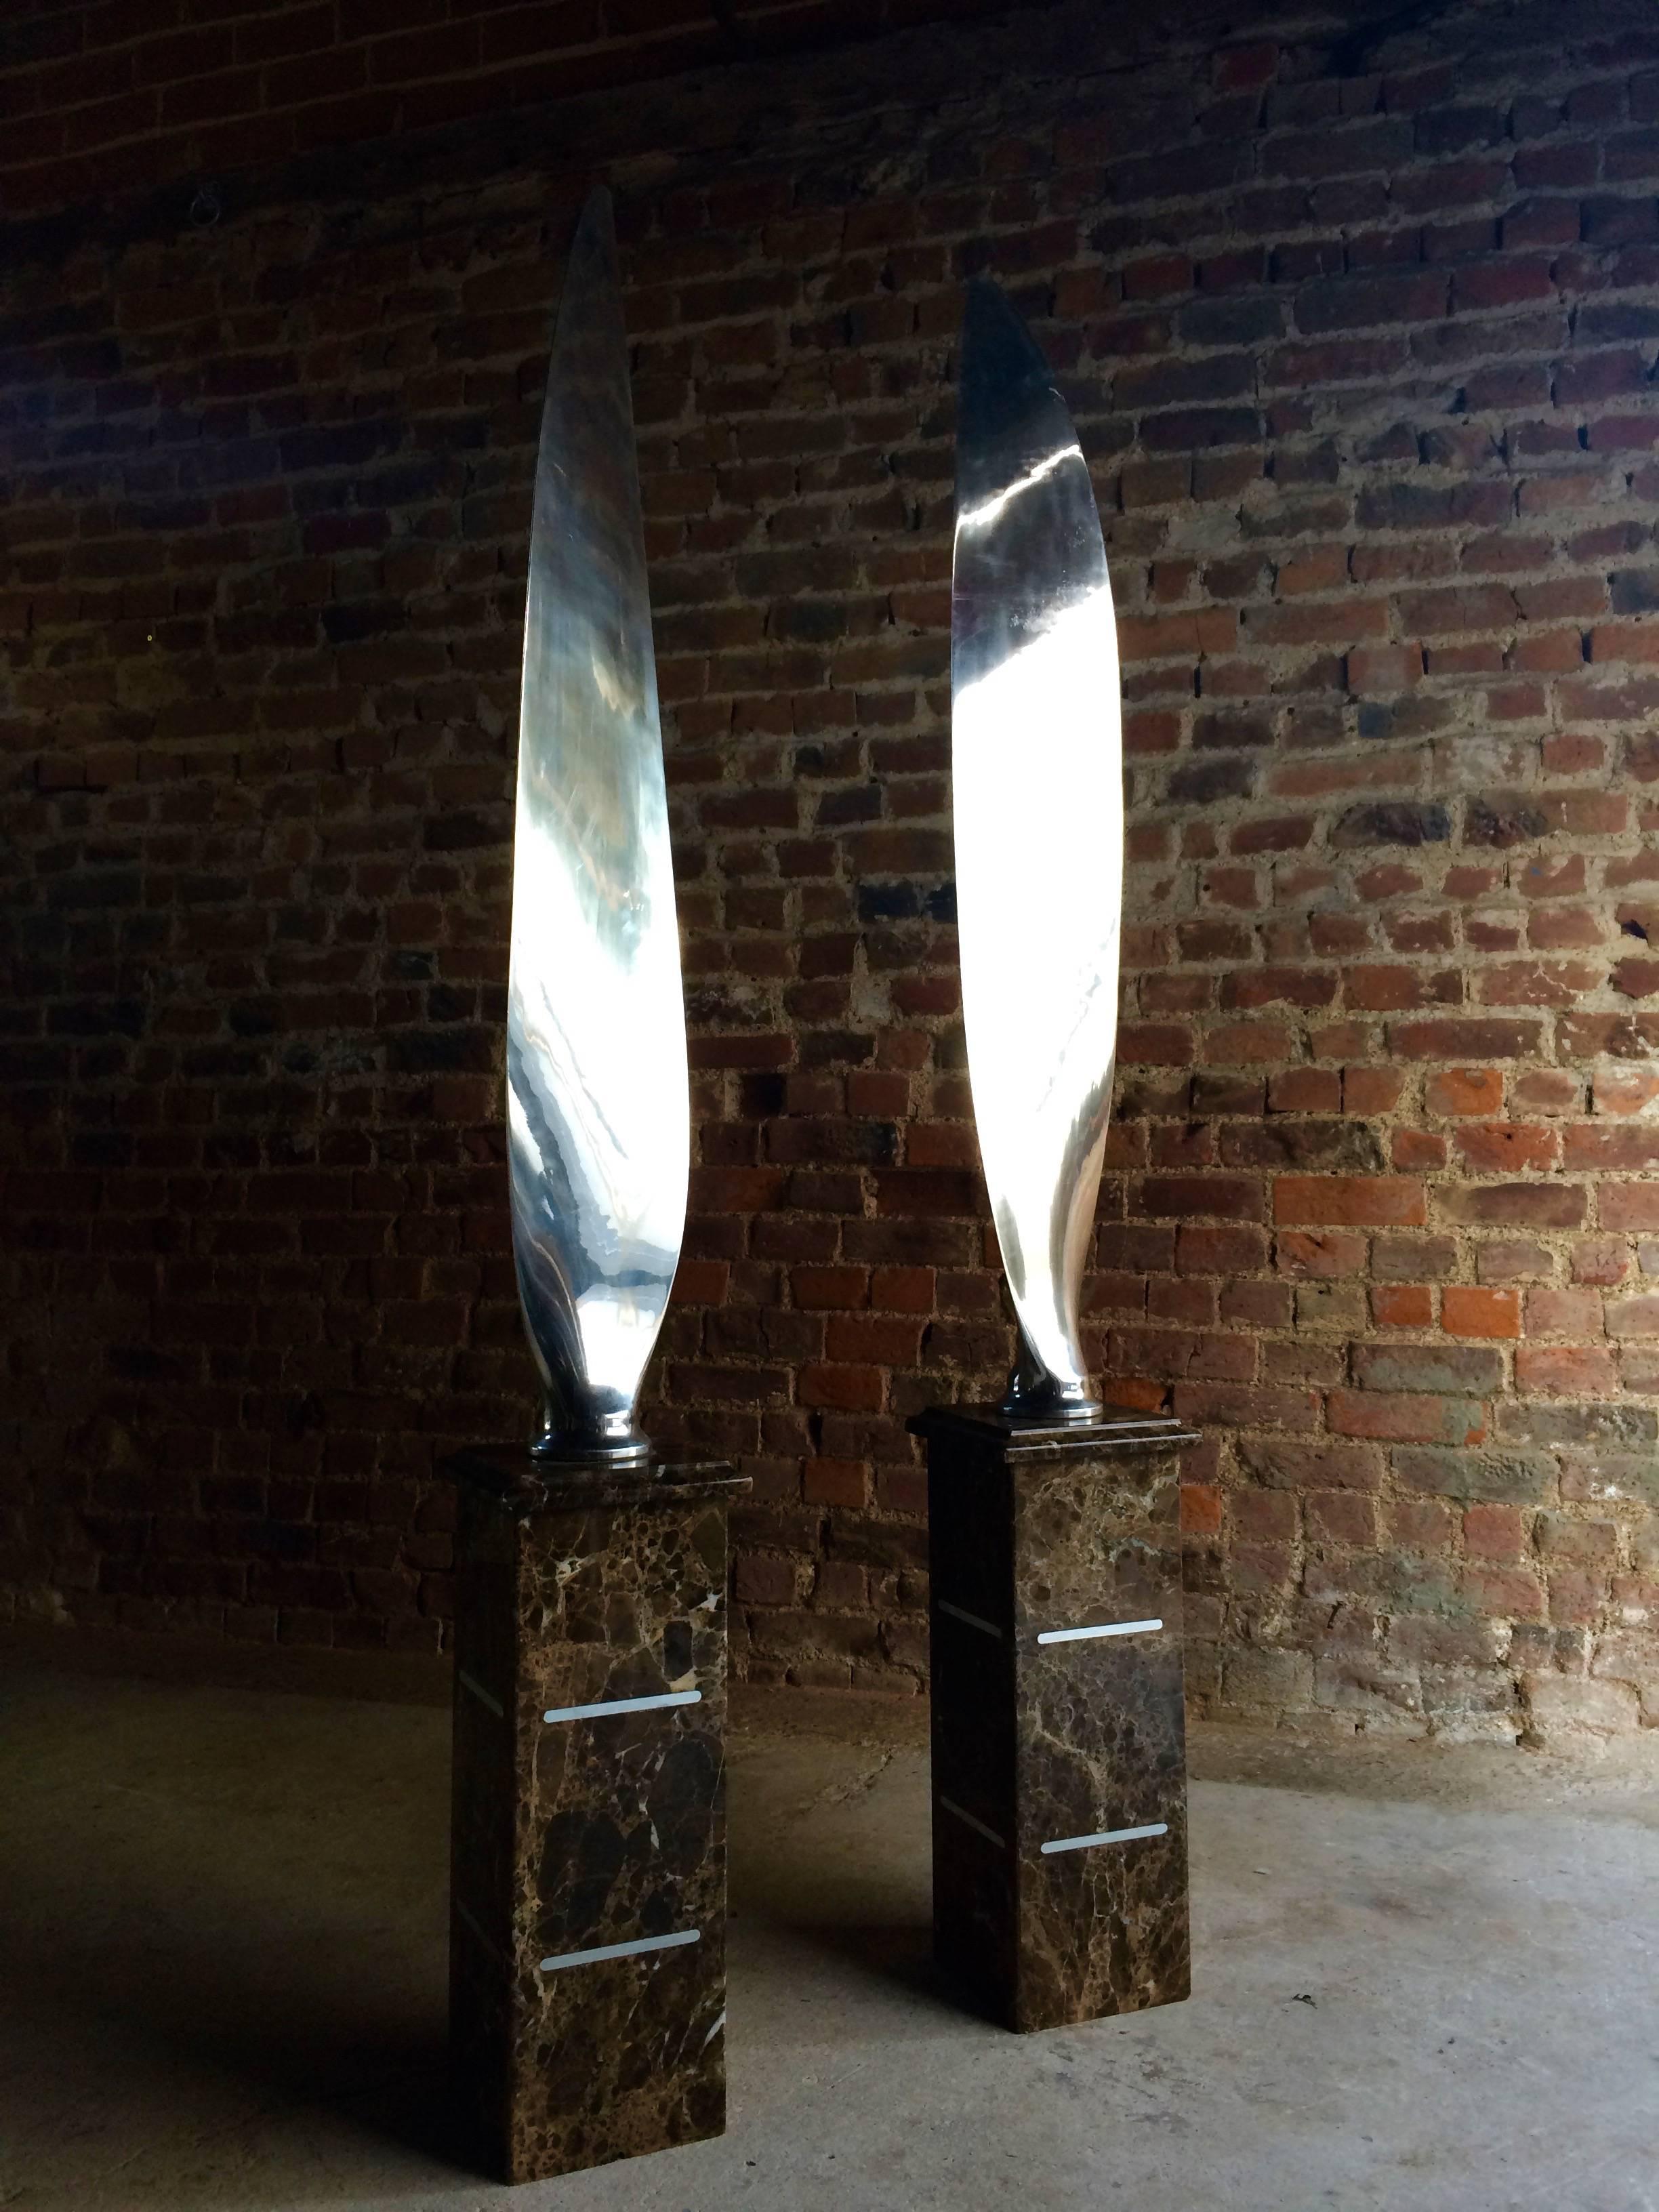 A stunningly beautiful unique and one of a kind pair of chrome Airplane Propeller Blades, each highly polished to mirror effect, both supported on marble standings. Very decorative as modernist sculptures, for display or collection use only, the